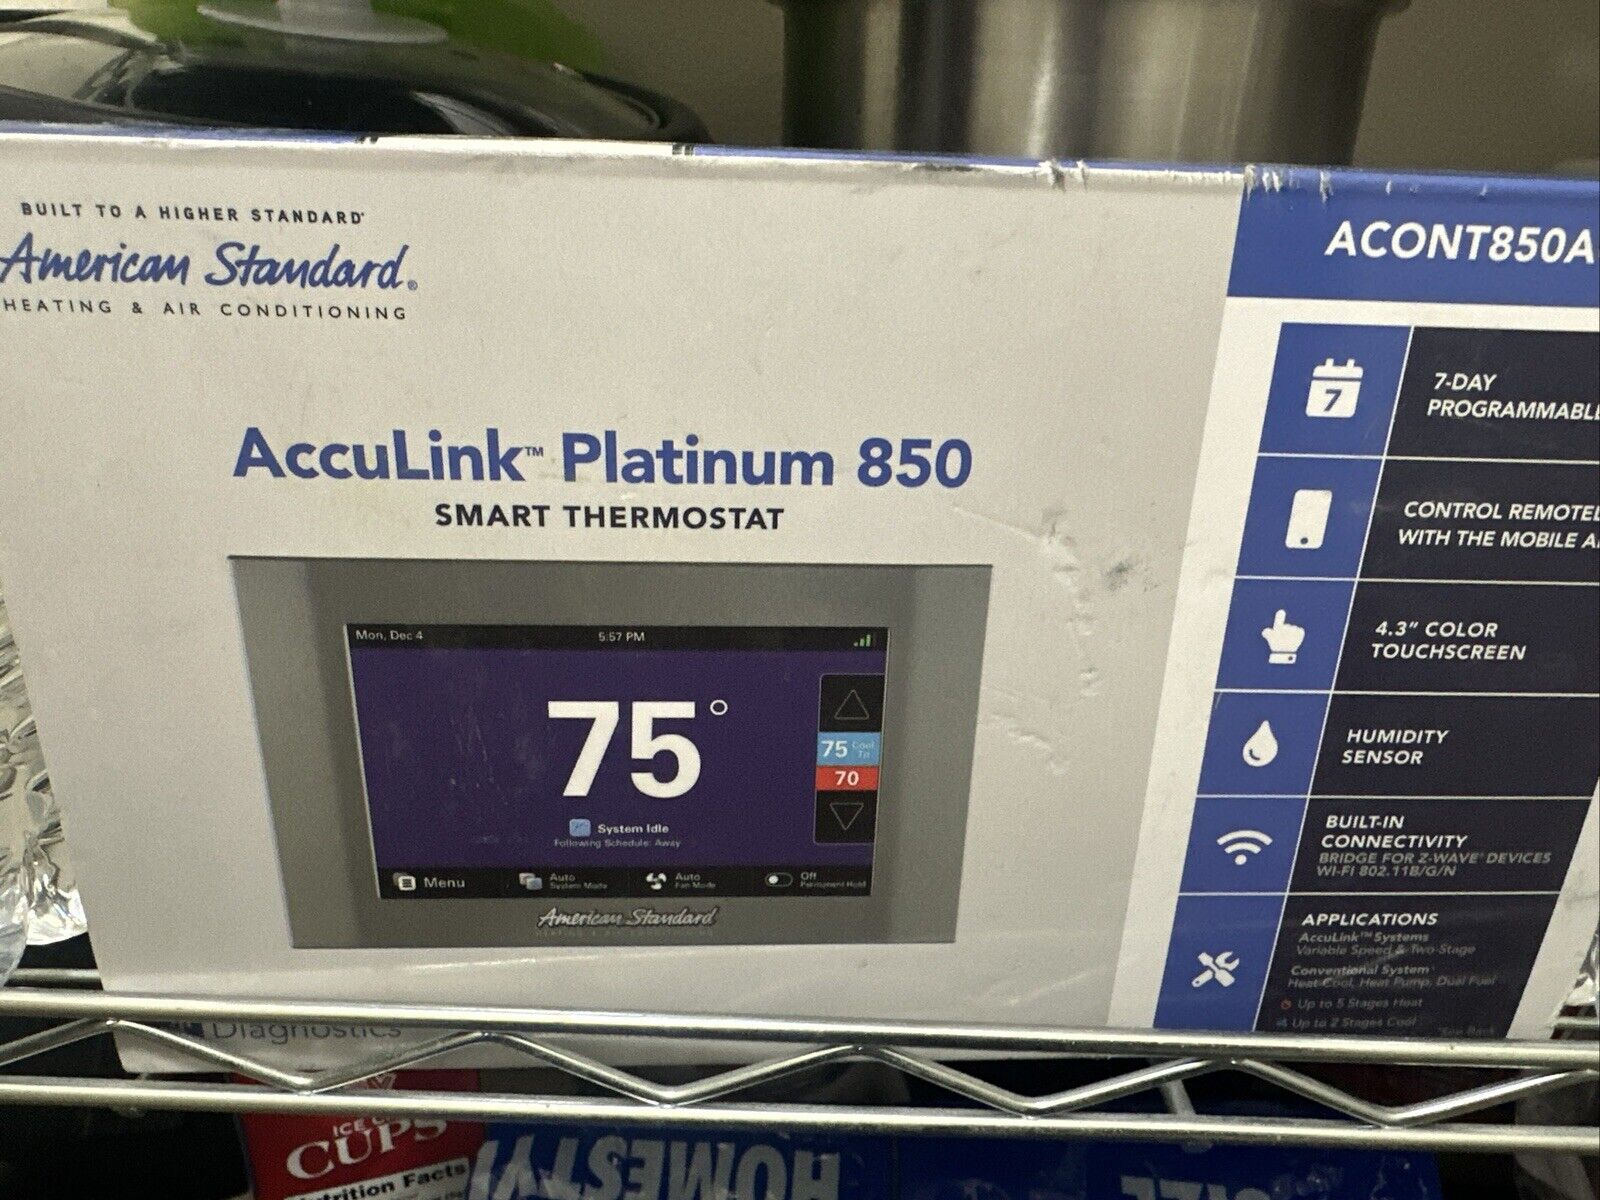 American Standard Acculink Platinum 850 with Nexia Smart Home